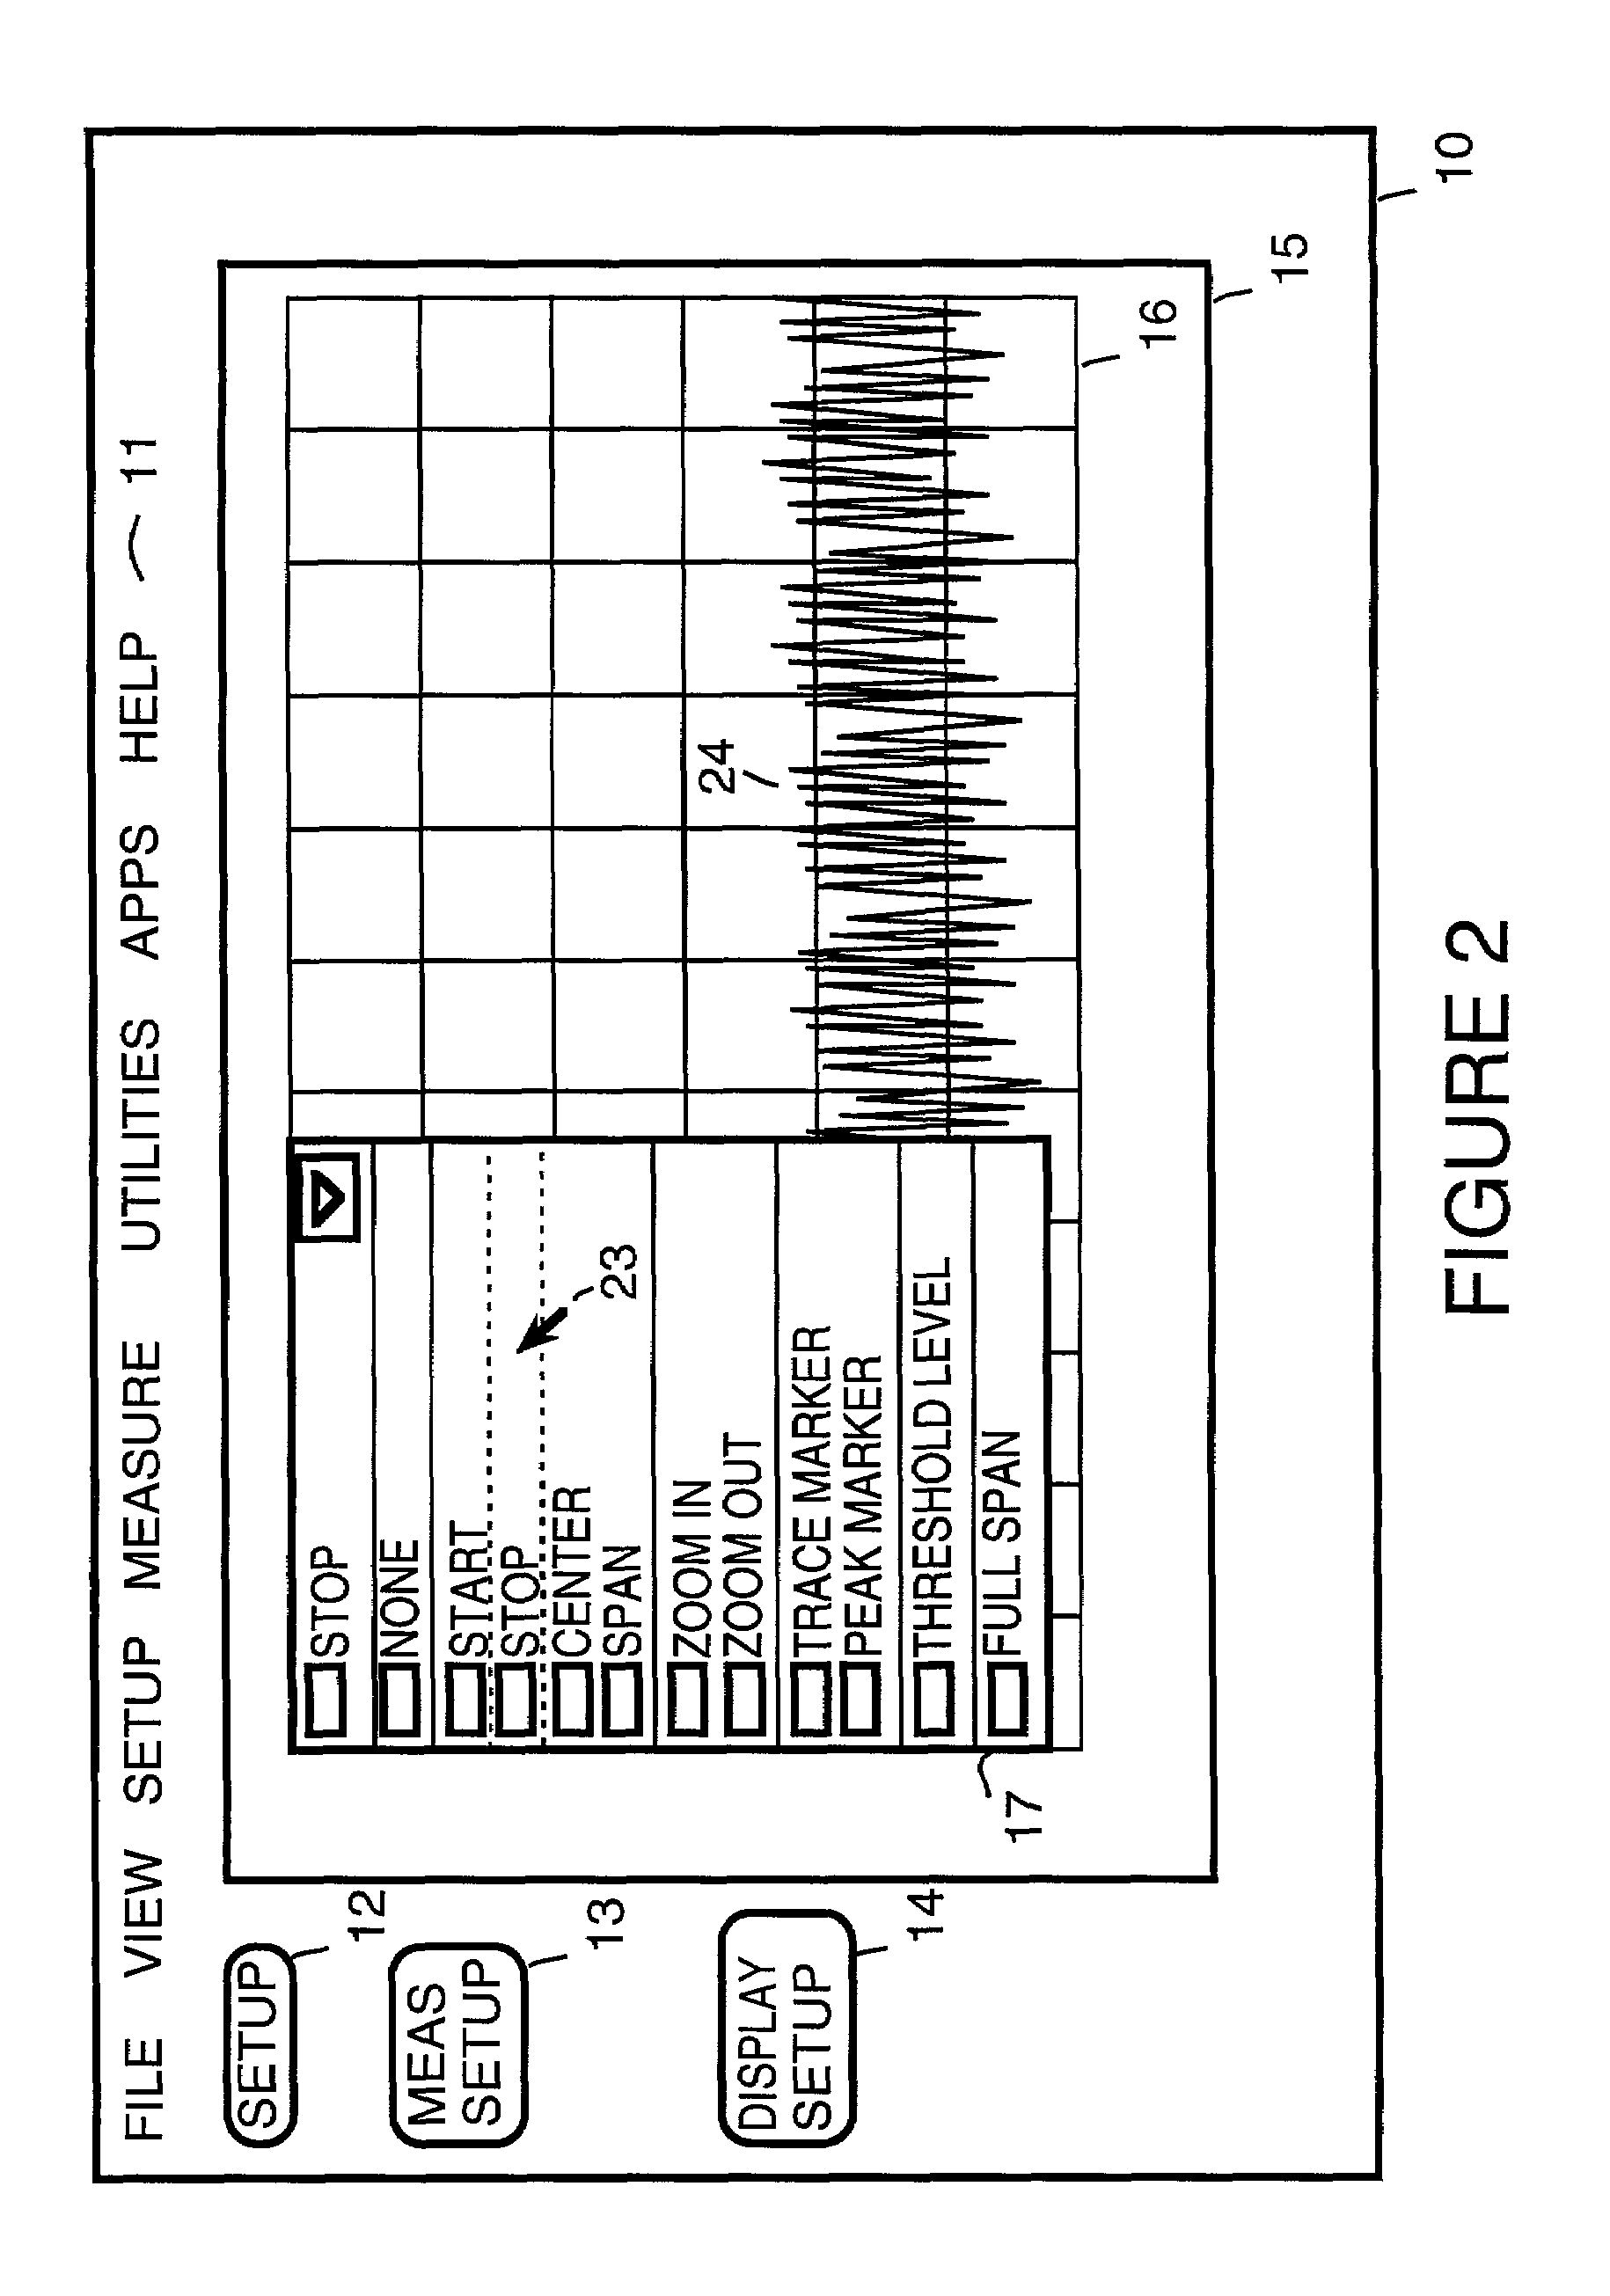 Rapid graphical analysis of waveforms using a pointing device